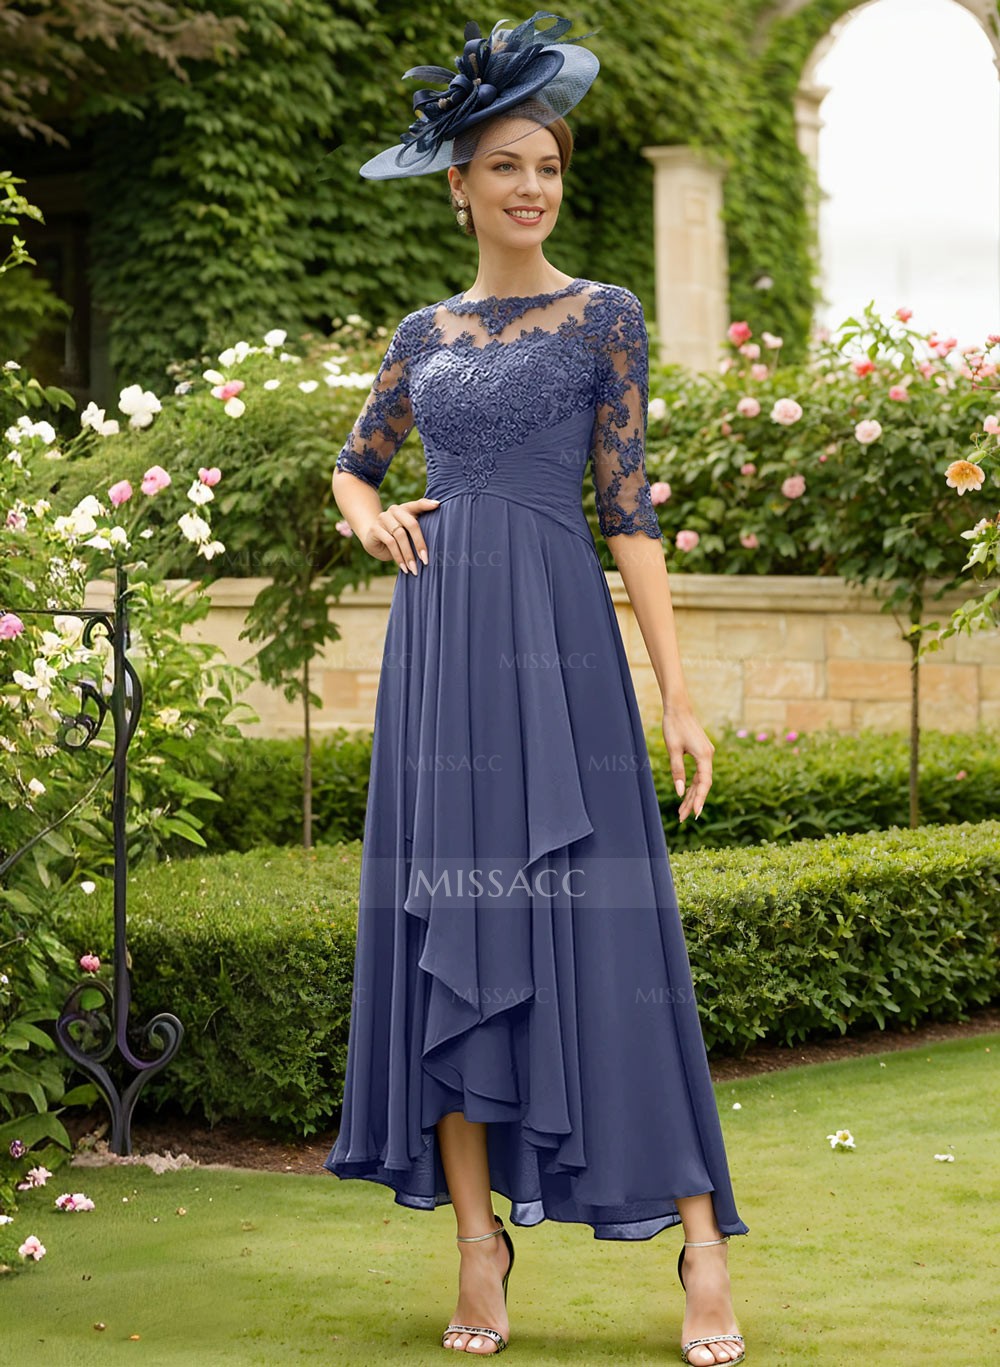 A-Line Cowl Neck Lace/Chiffon Mother Of The Bride Dresses With Back Hole